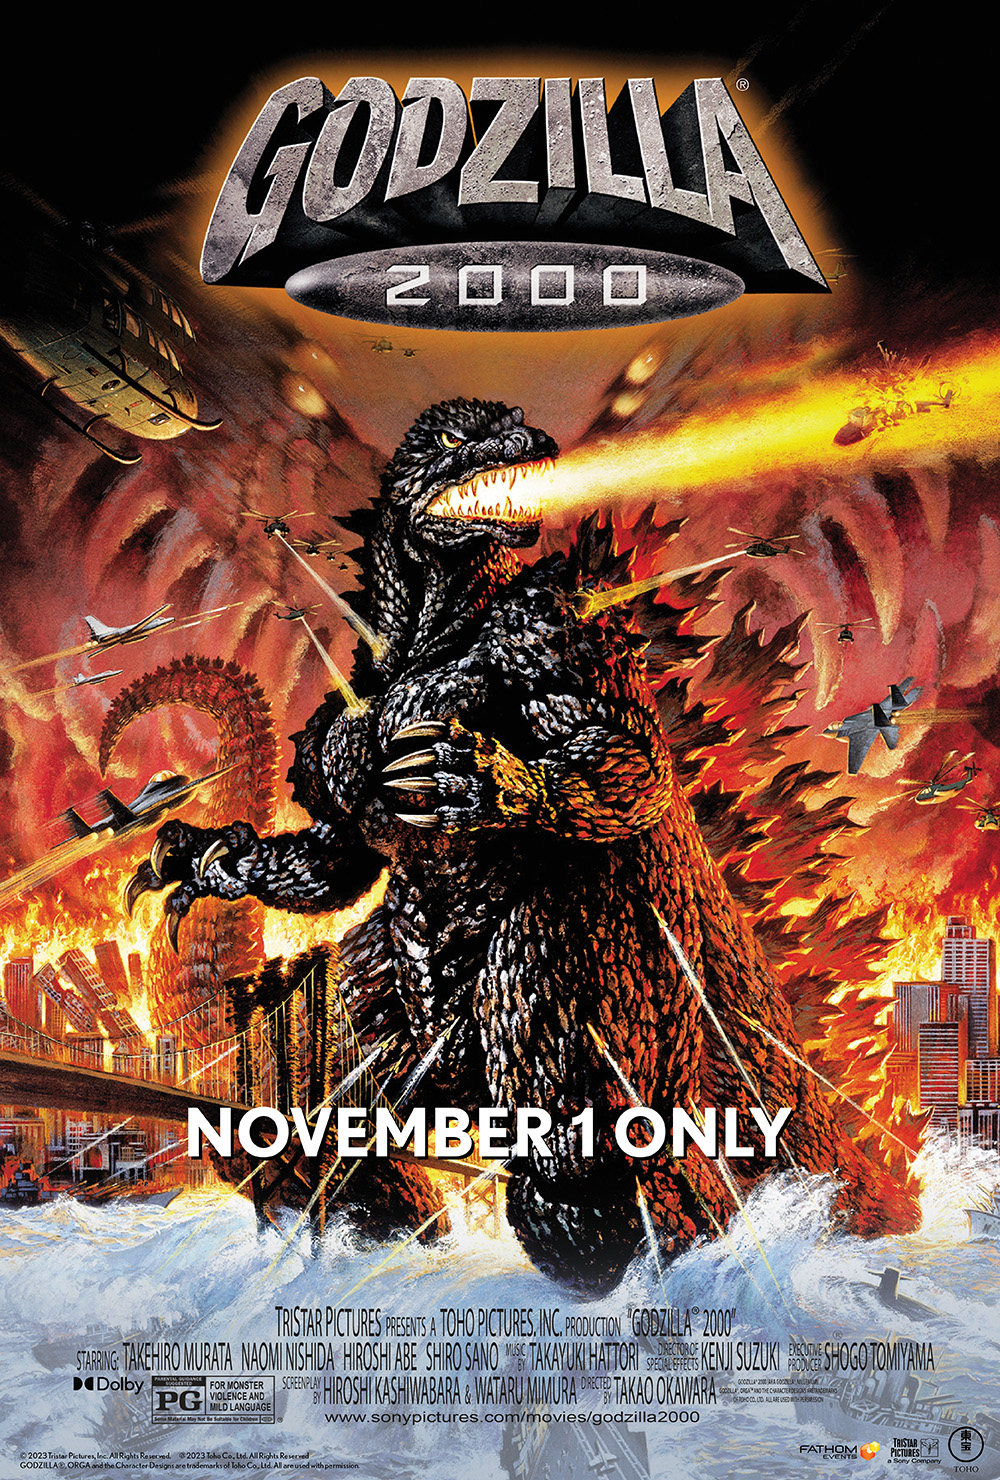 Fathom Events and Toho International Celebrate the King of All Monsters with “Godzilla 2000”, Returning to Theaters Nationwide on Wednesday, November 1